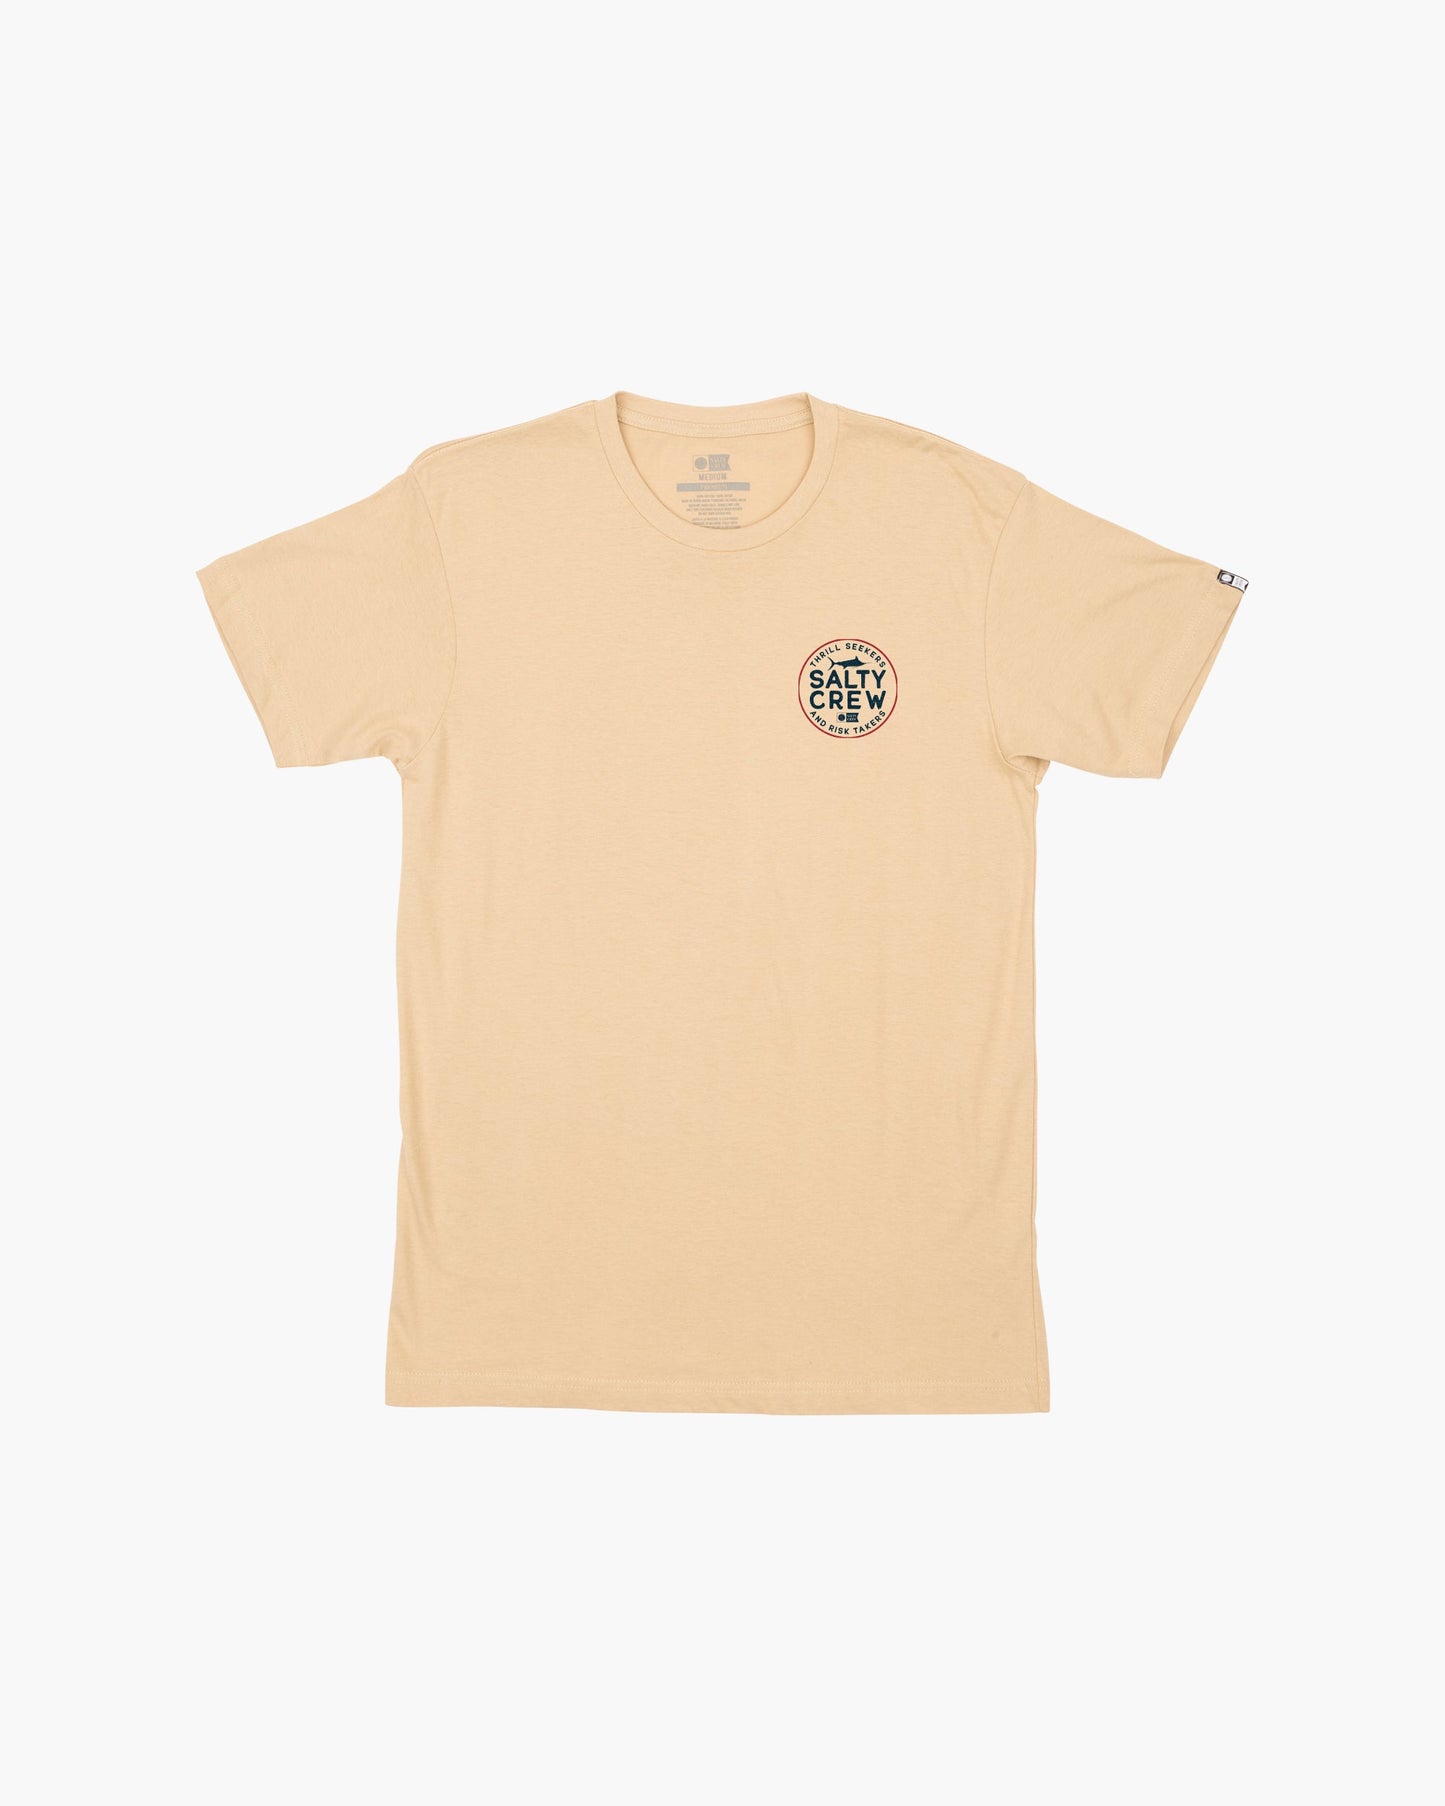 FIRST MATE PREMIUM S/S TEE - Camel